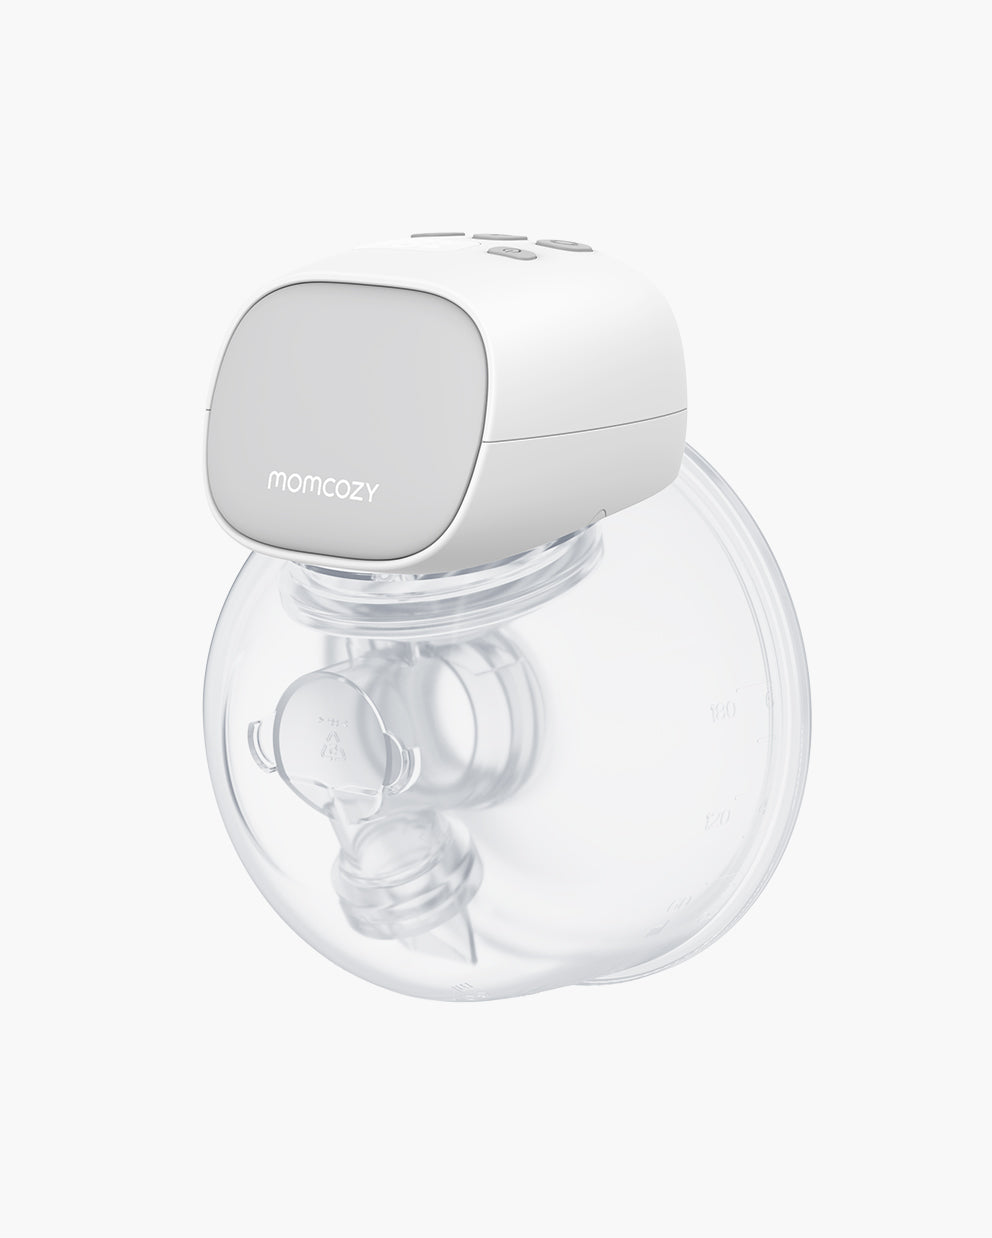 Momcozy Introduces Wearable Breast Pumps for a Stress-Free, Cozy Holiday